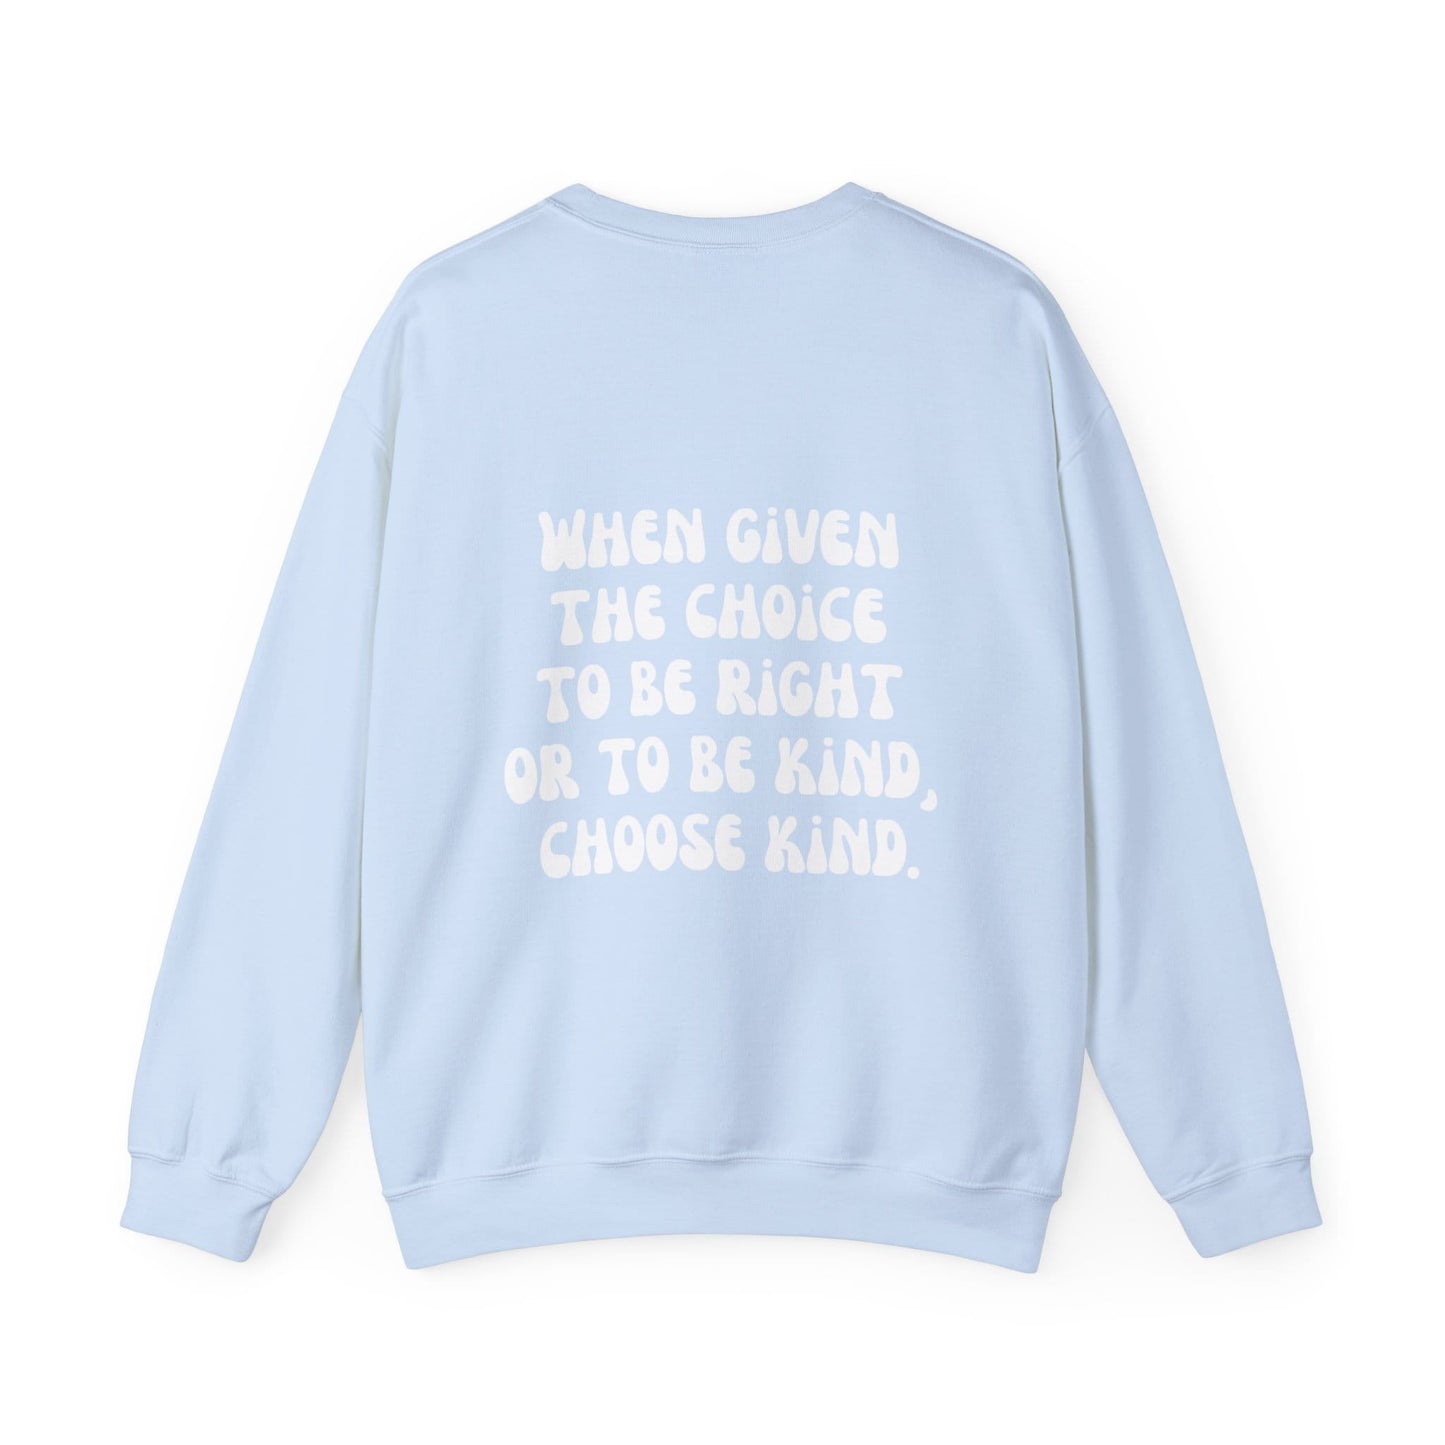 Choose Kindness | Yin Yang Inspirational Positive Quote Hoodie | Retro Vibes Trippy Hippie Aesthetic Pullover Sweatshirt